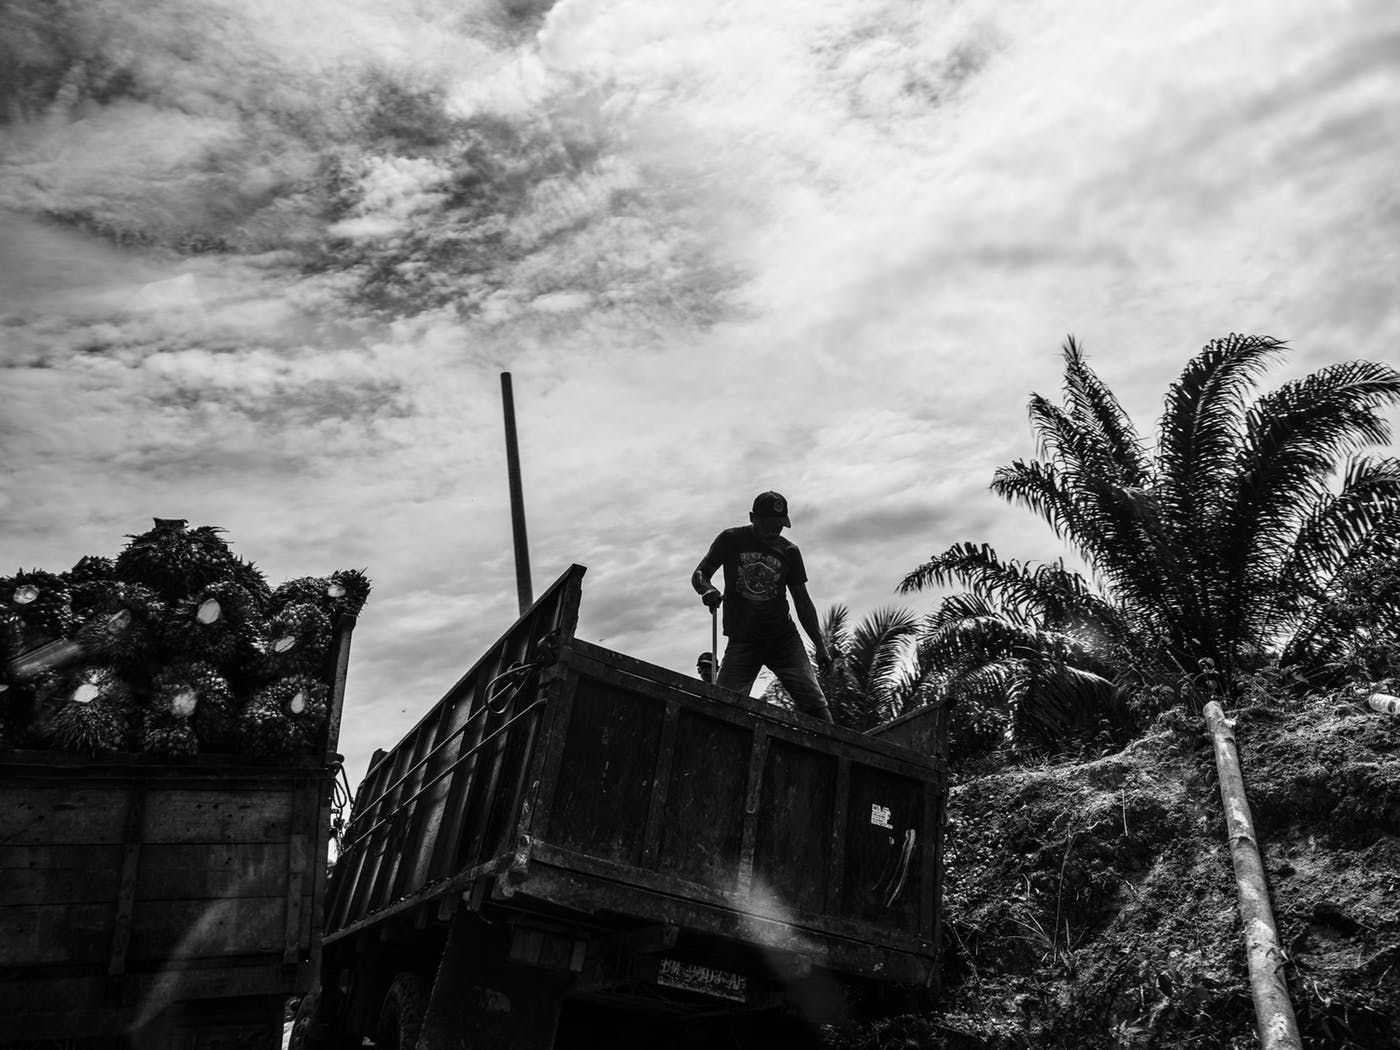 Workers transfer palm fruit from one truck to another. Image by Xyza Cruz Bacani. Indonesia, 2018.